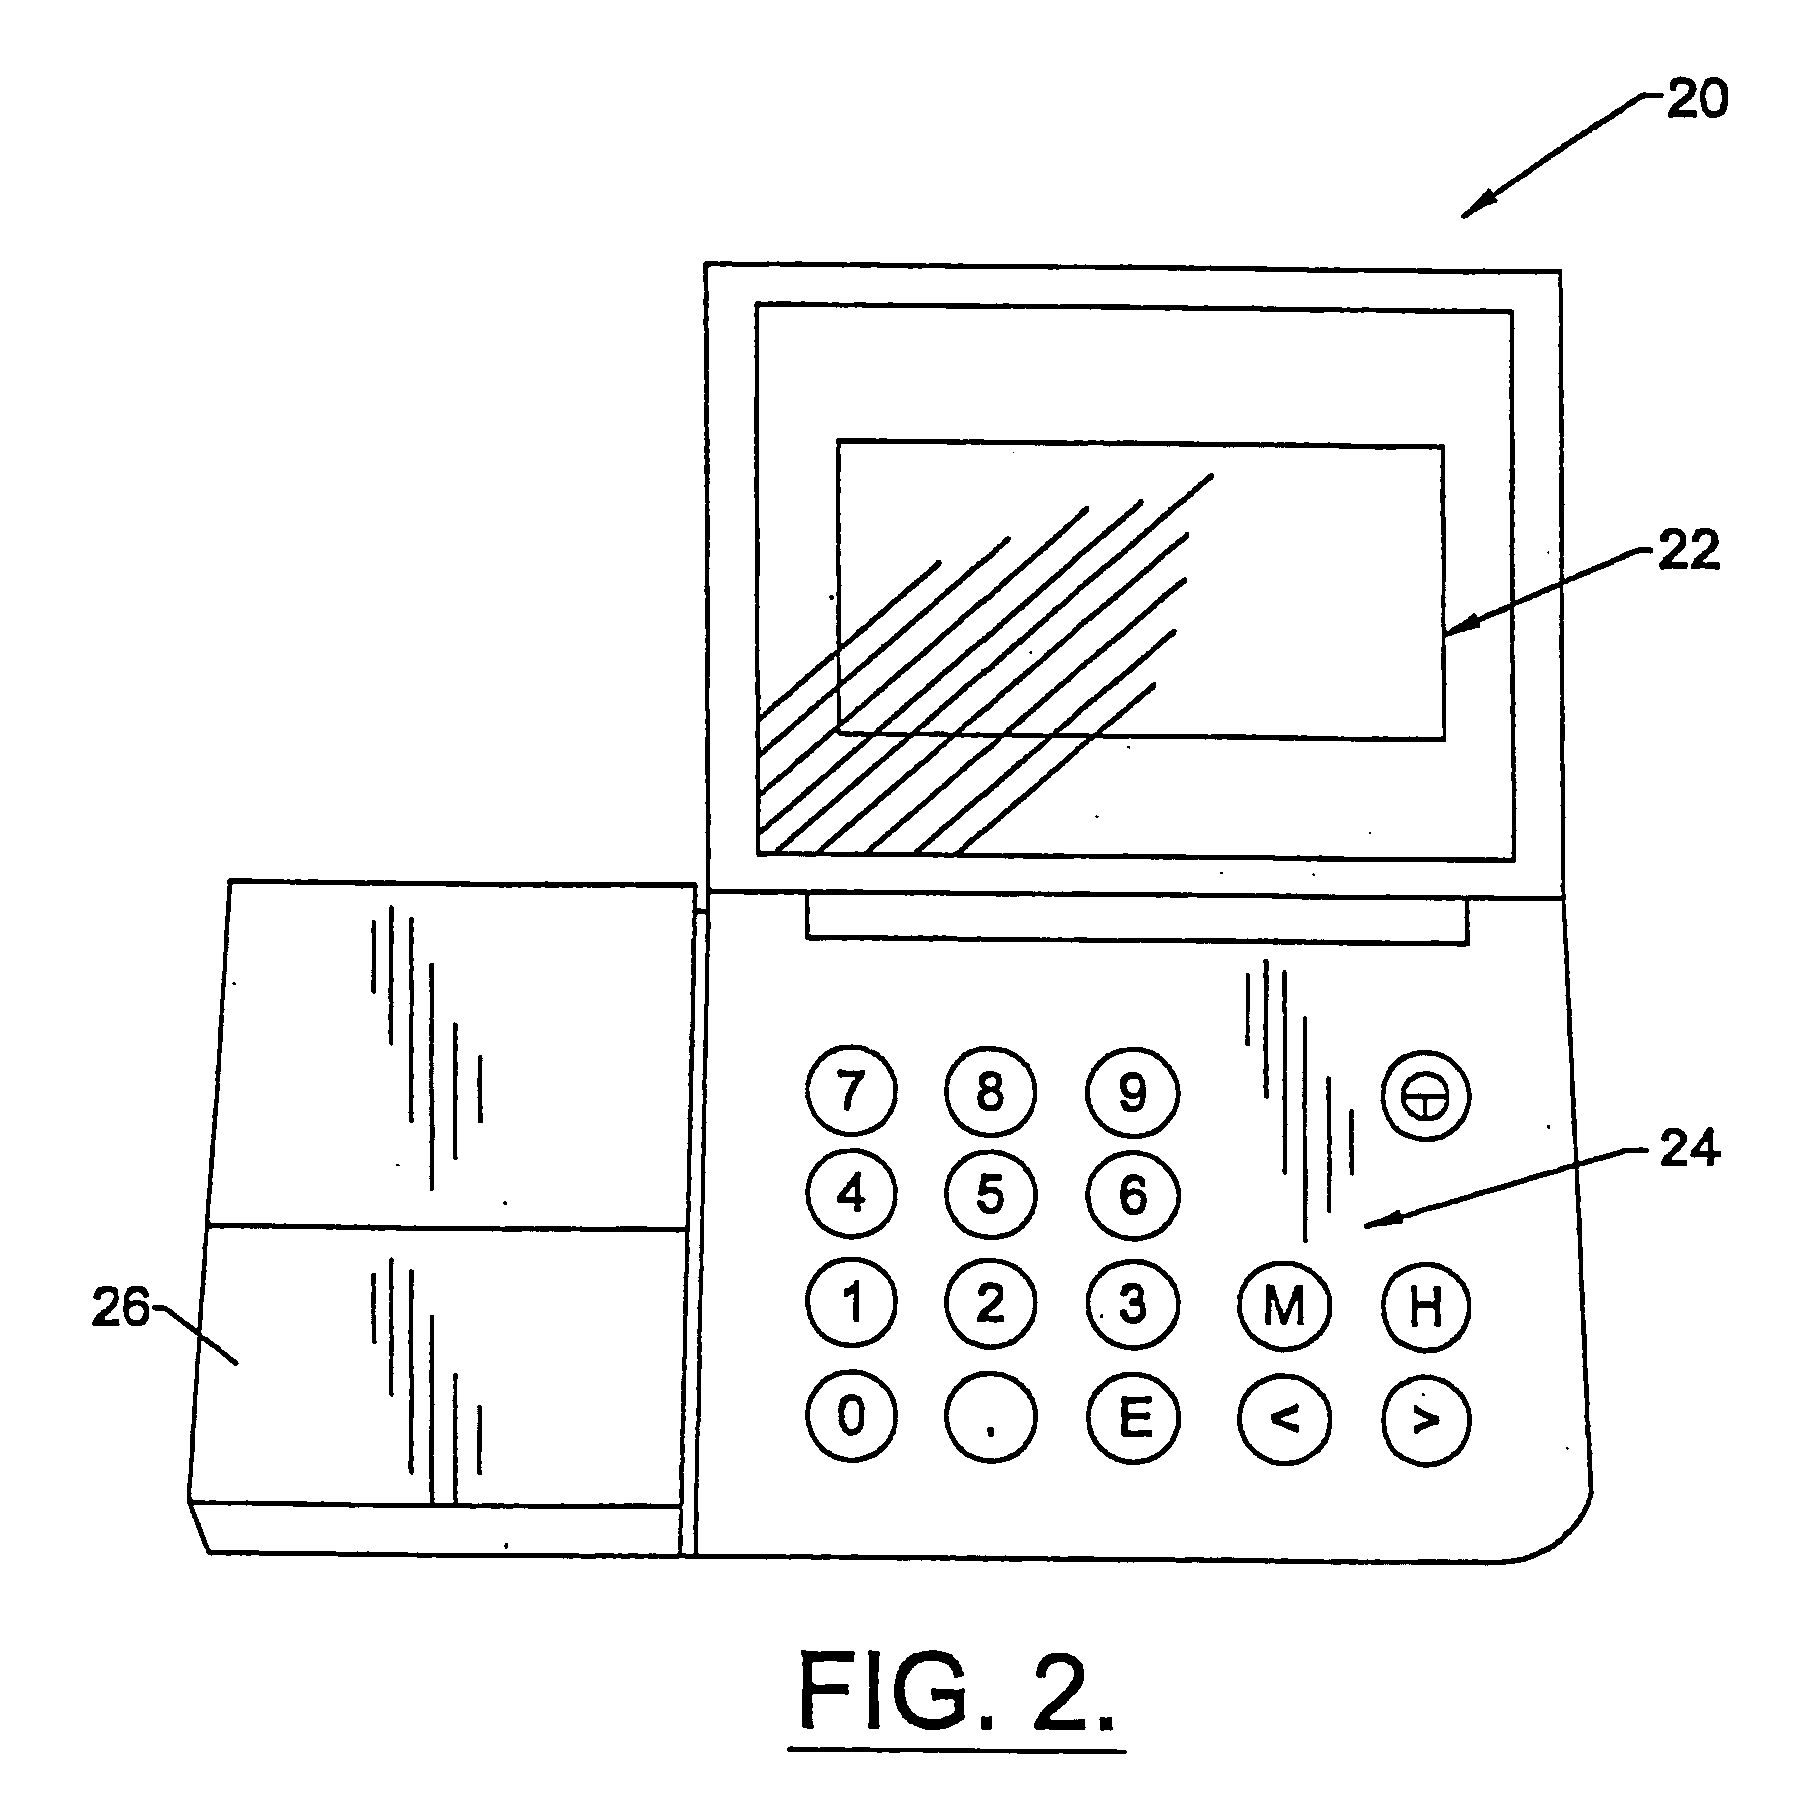 Apparatus and methods for monitoring and modifying anticoagulation therapy of remotely located patients